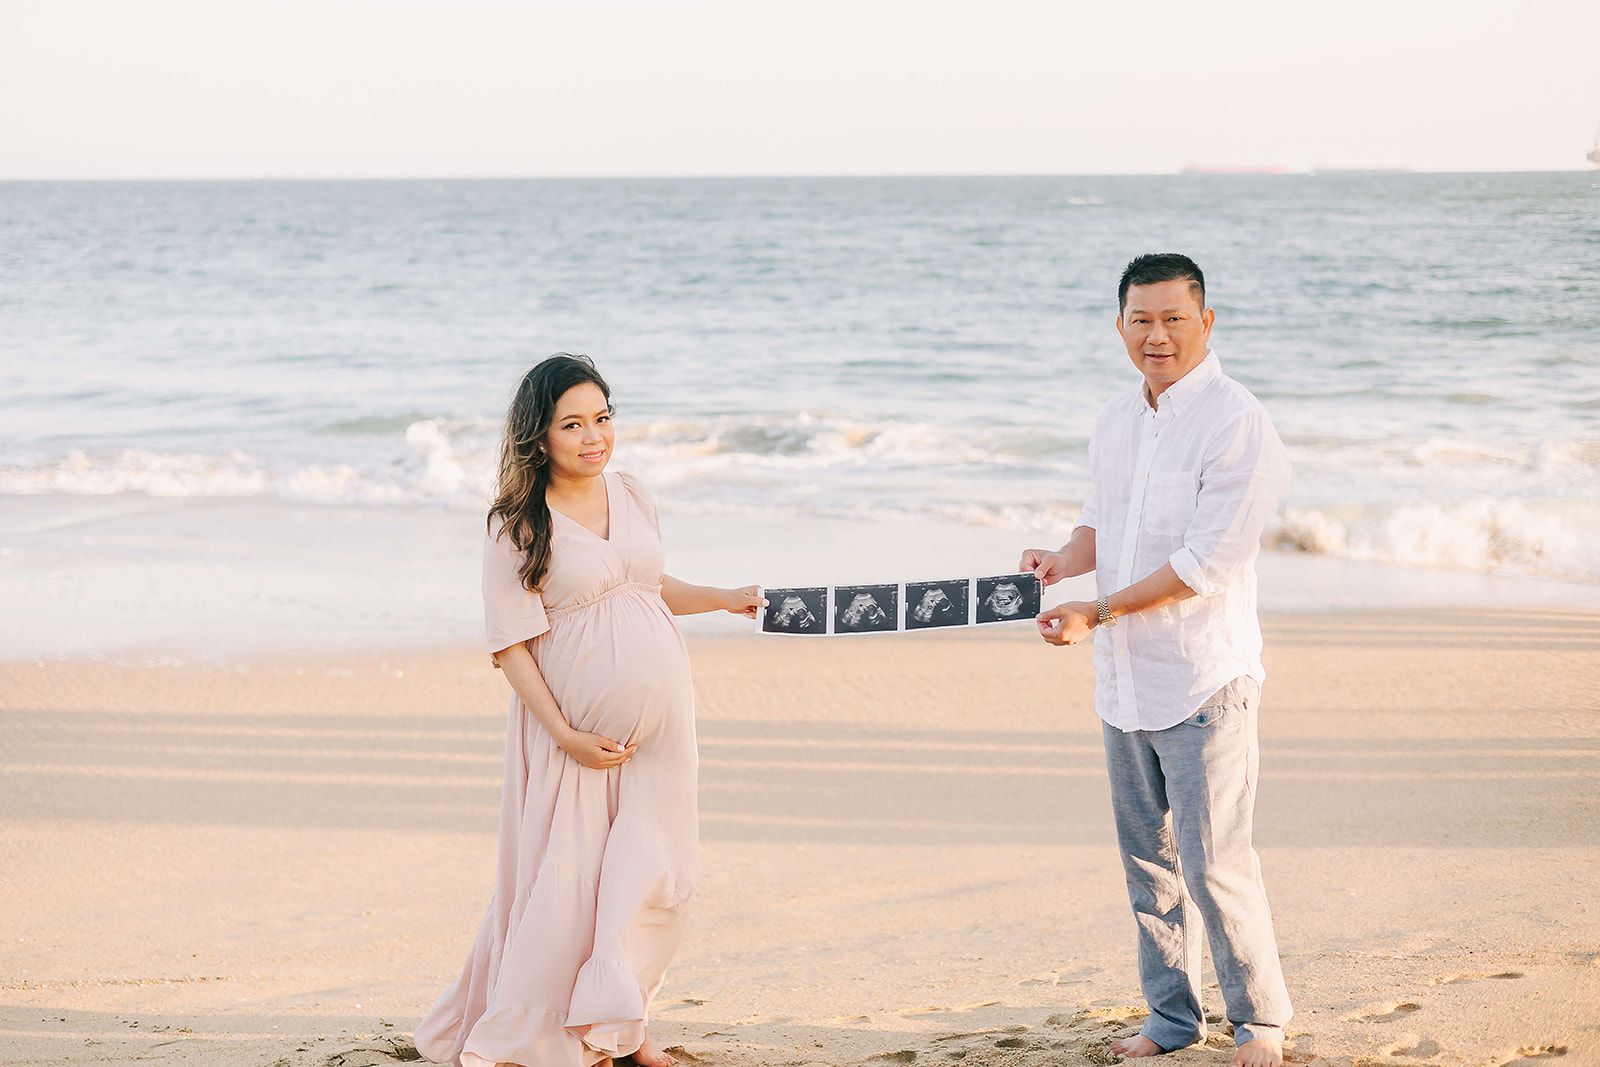 A mother to be and father stand on a beach holding their sonogram strip between them